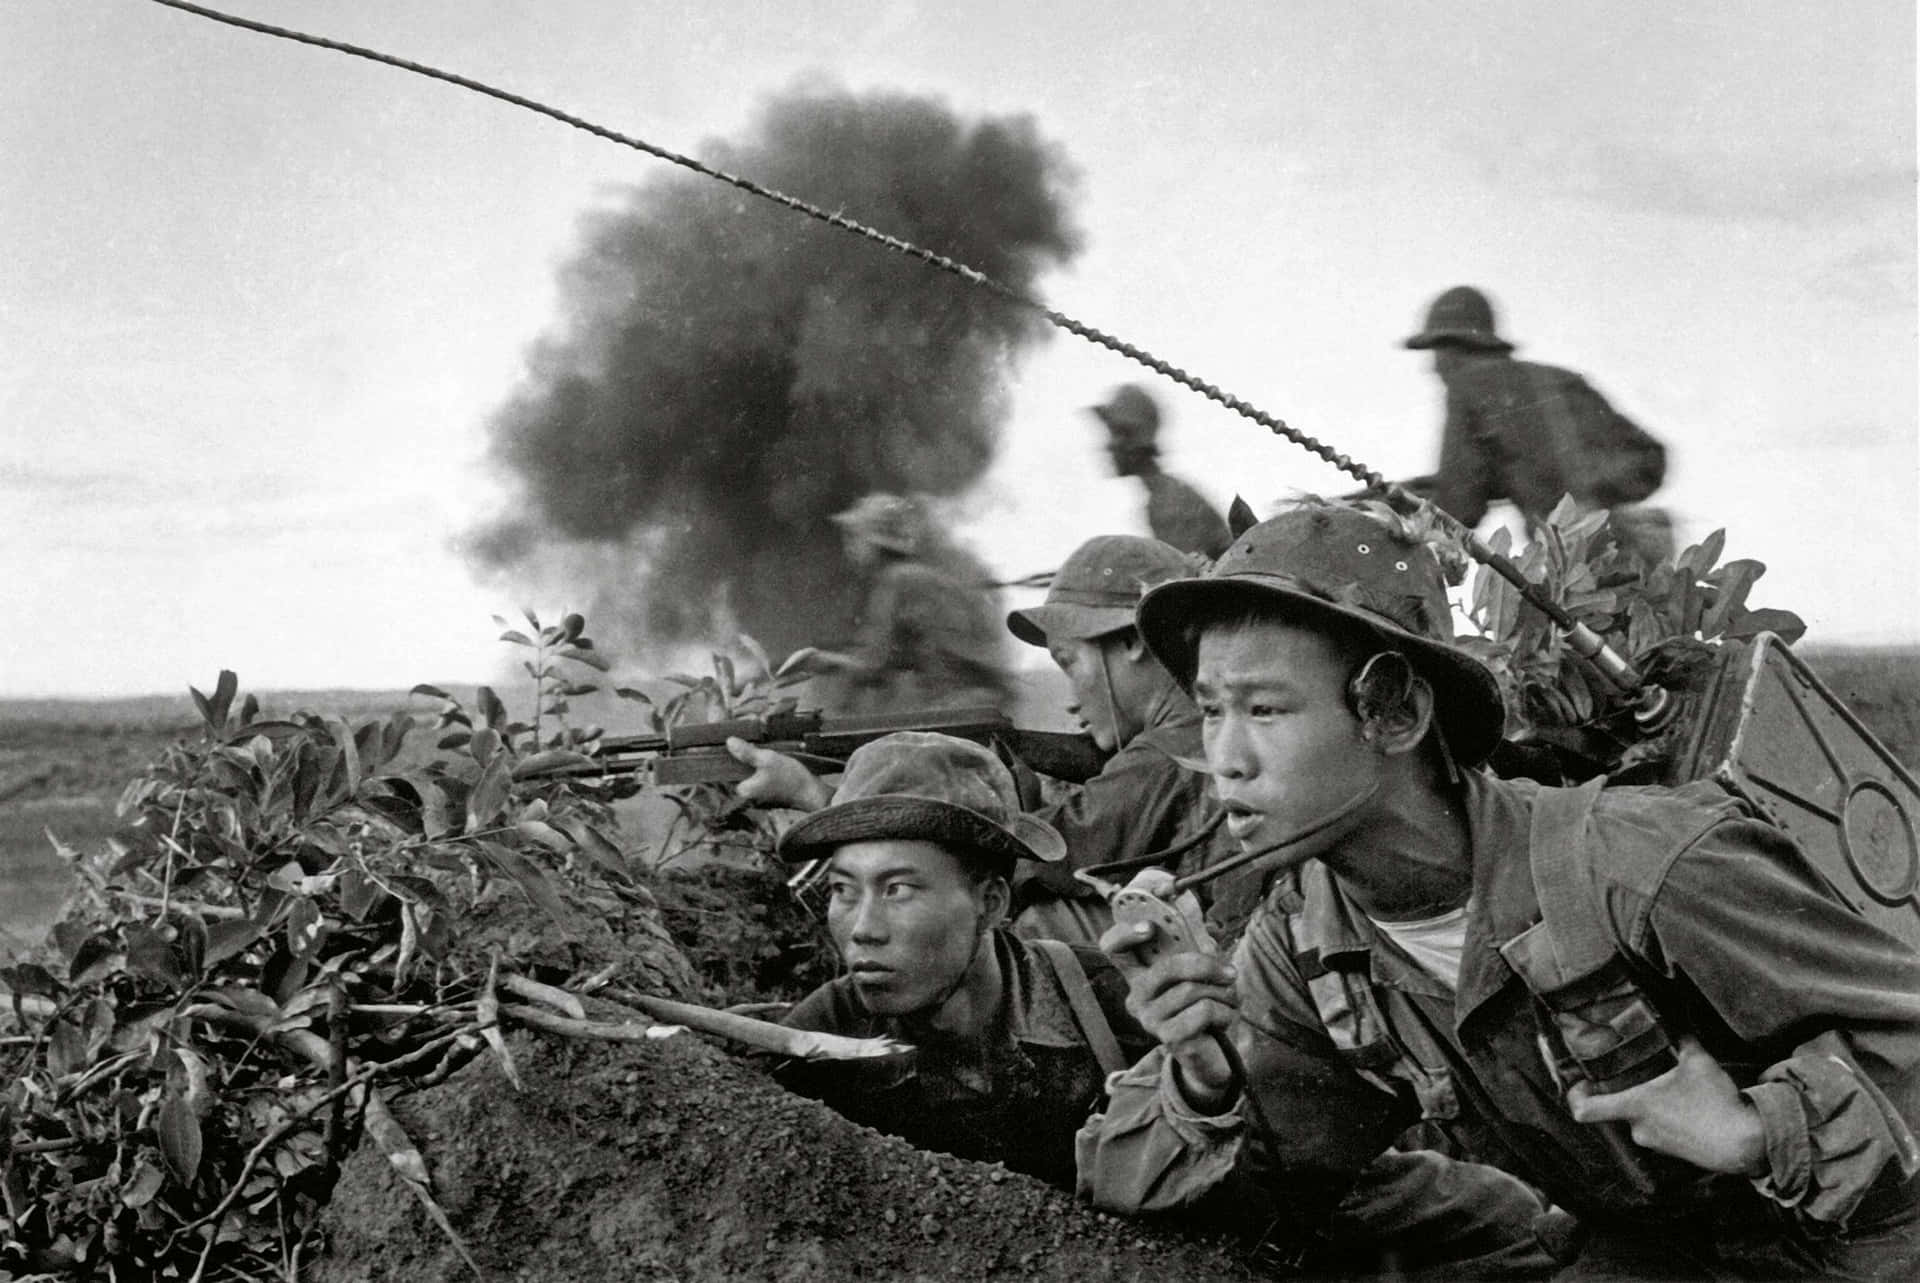 US soldiers defending their position during the Vietnam War